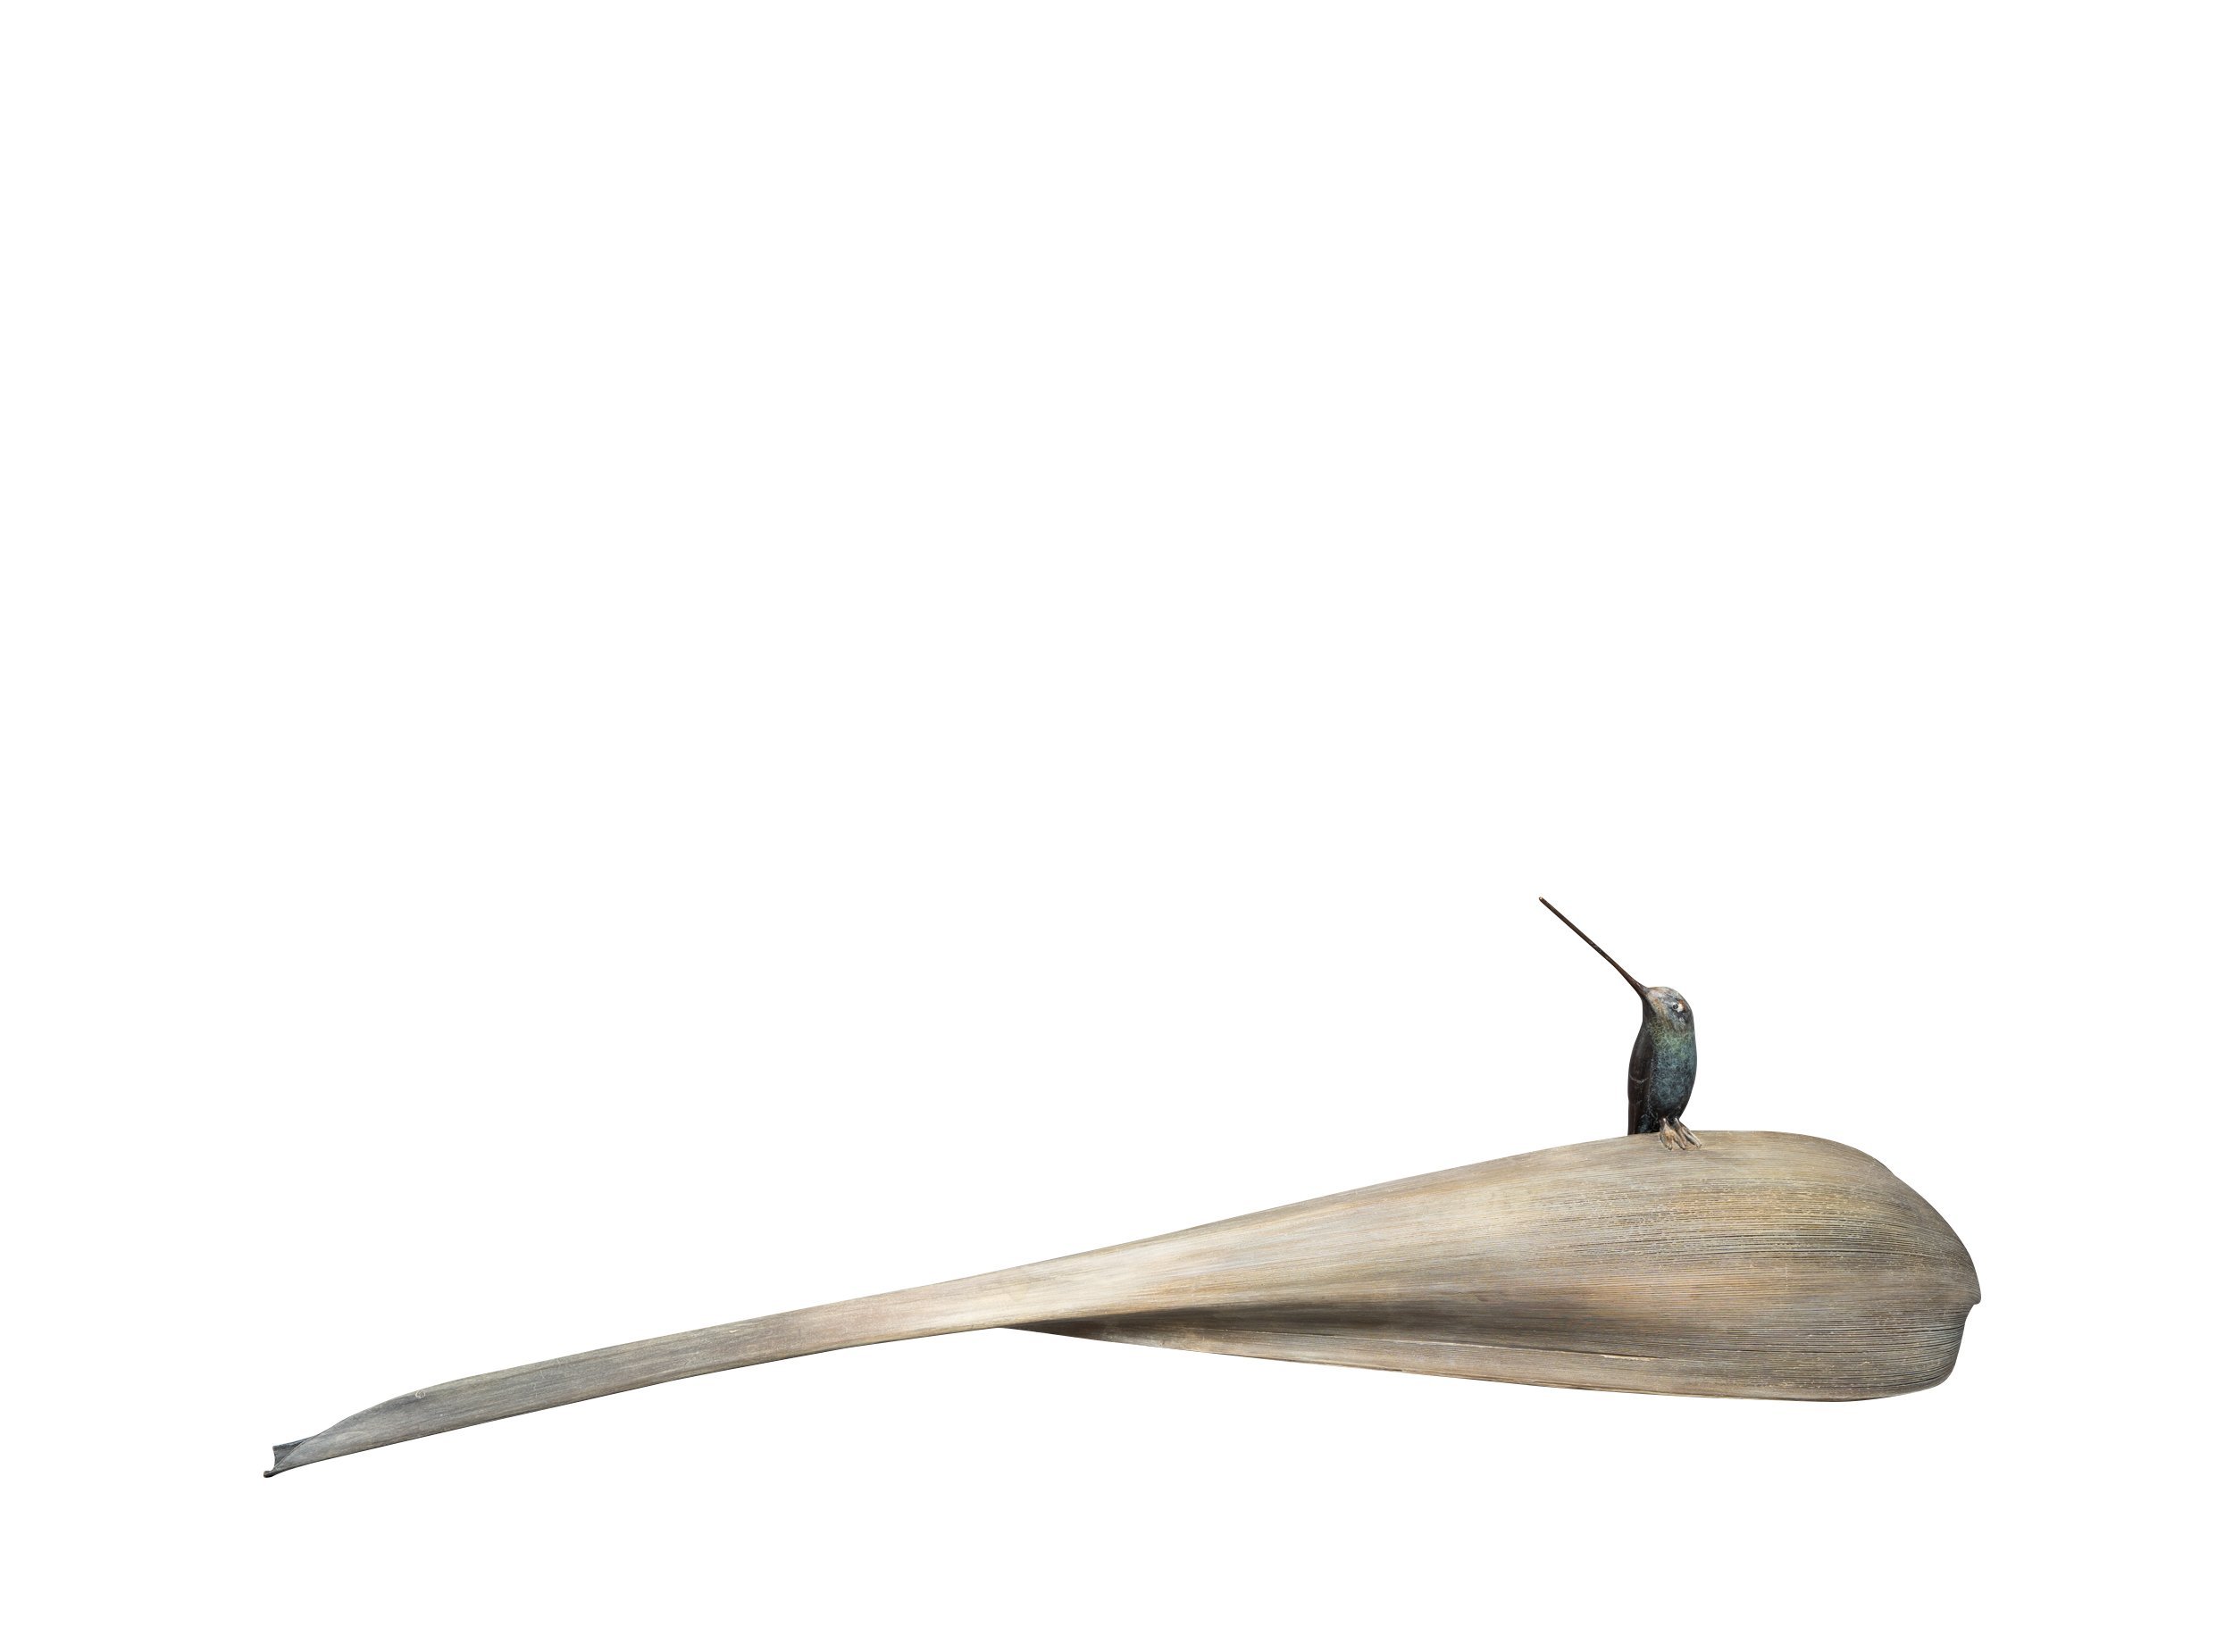 Mark Dedrie; Sword Colibri, 2019, Original Sculpture Bronze, 47 x 13 inches. Artwork description: 241 Bronze sculpture of a Colibri on a bronze palm leaf Selected for the 44th edition of Birds In Art at the Leigh Yawkey Woodson Art Museum US.The museum purchased in 2019 one of these exclusive sculptures for its permanent collection. ...